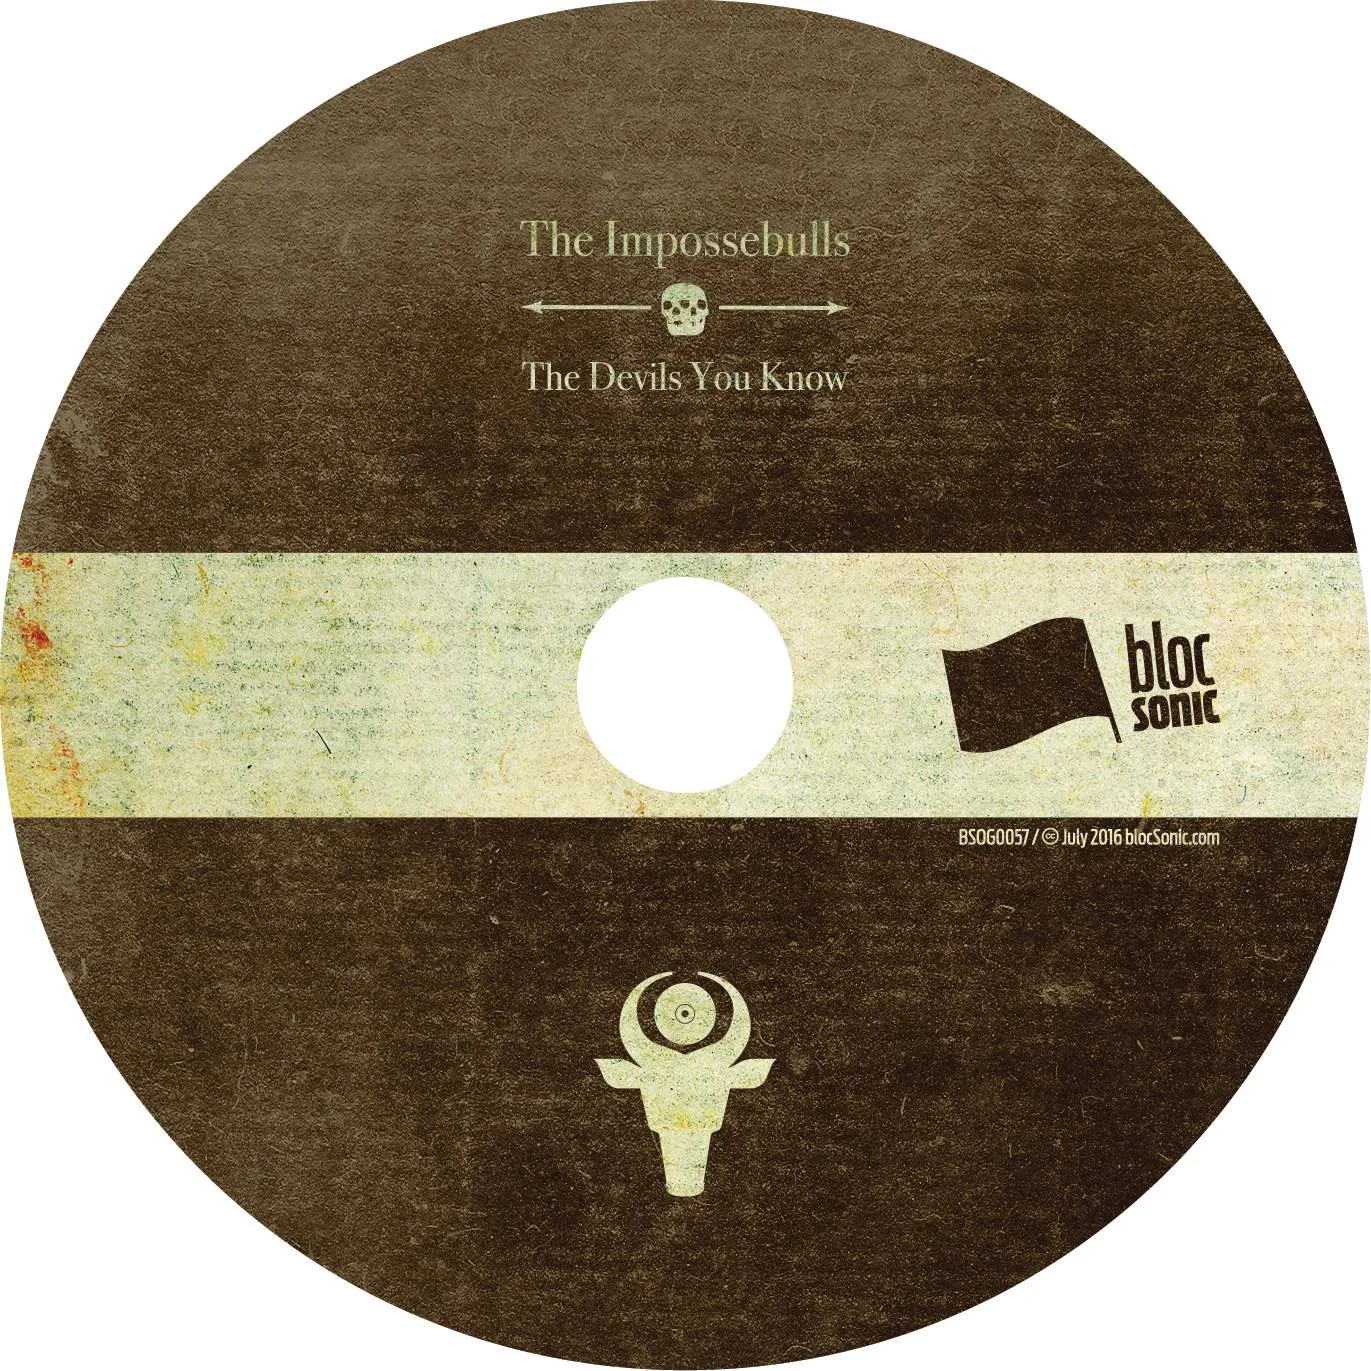 Album disc for “The Devils You Know” by The Impossebulls